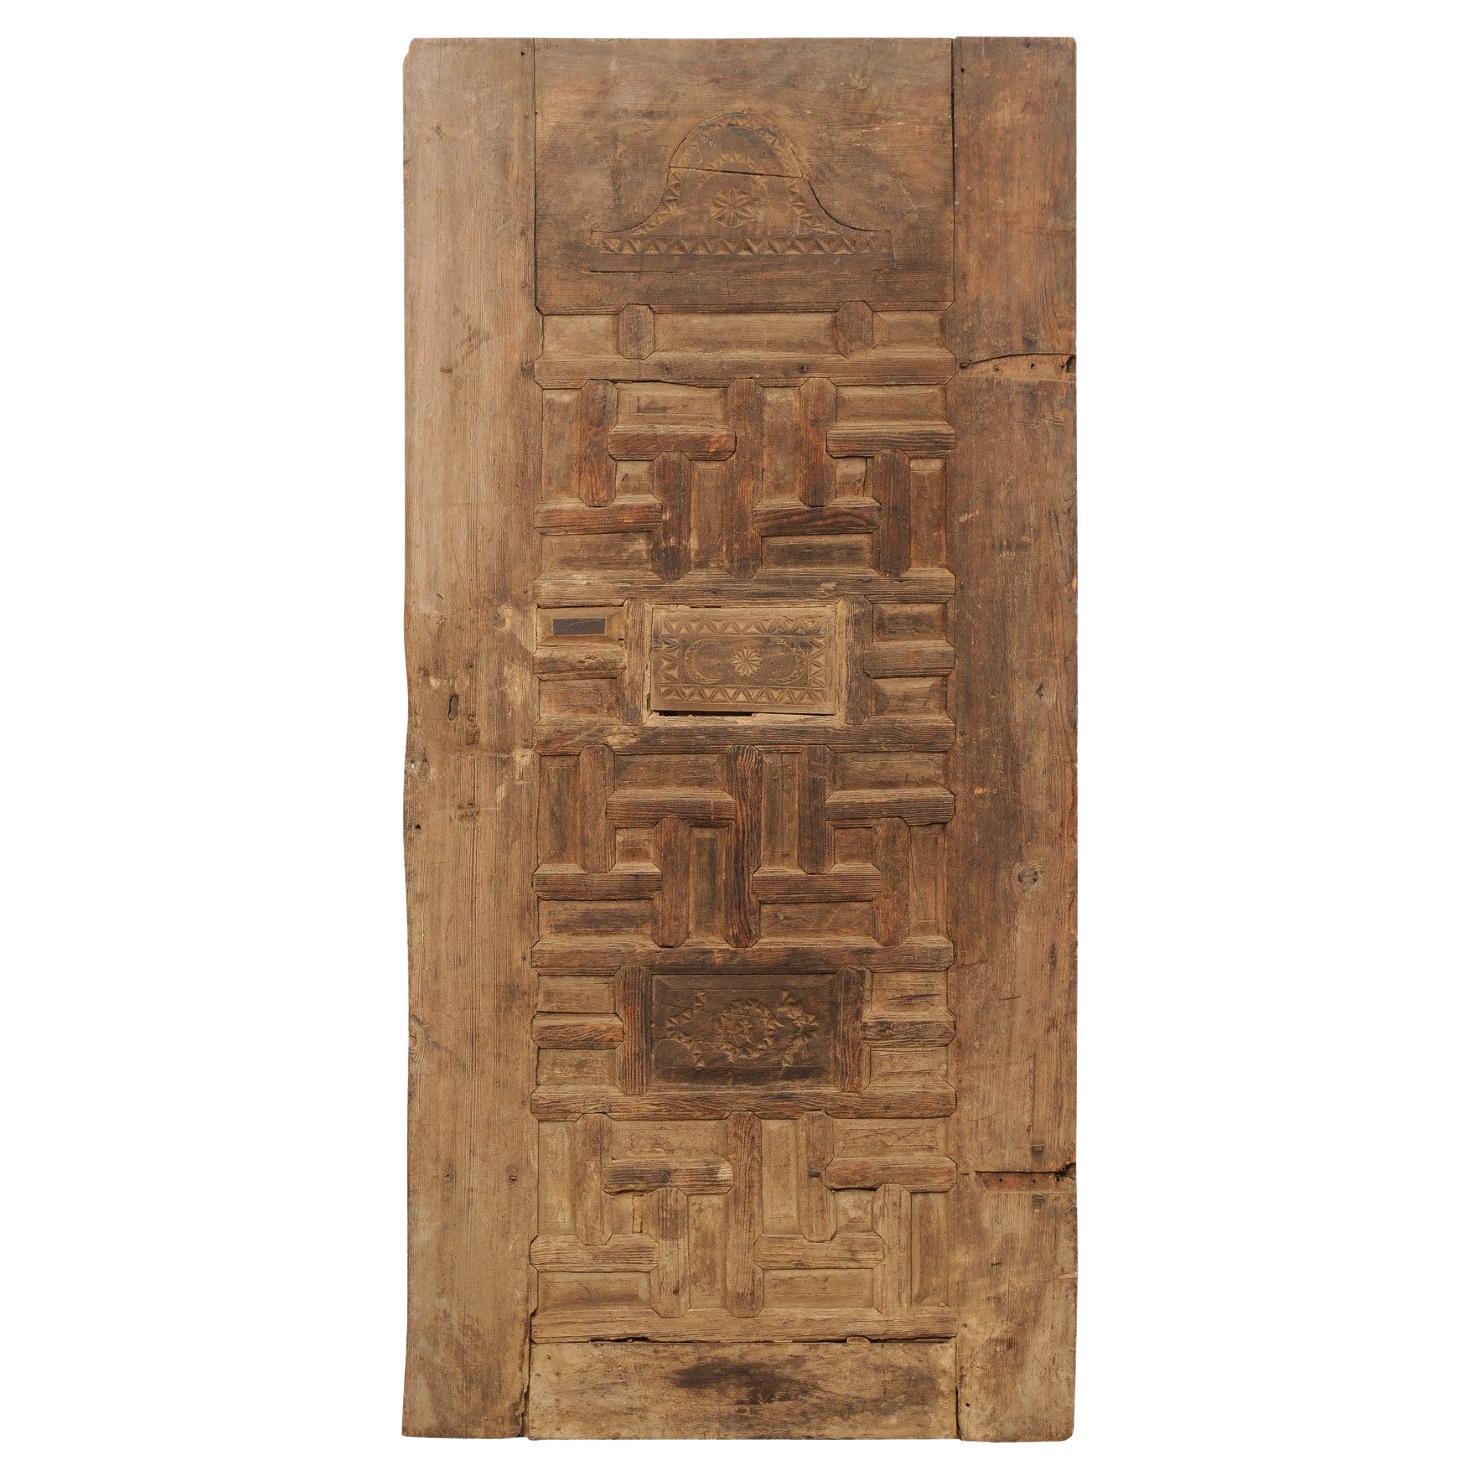 Turkish 6+ Ft Tall Hand-Carved Wooden Door, 19th Century For Sale